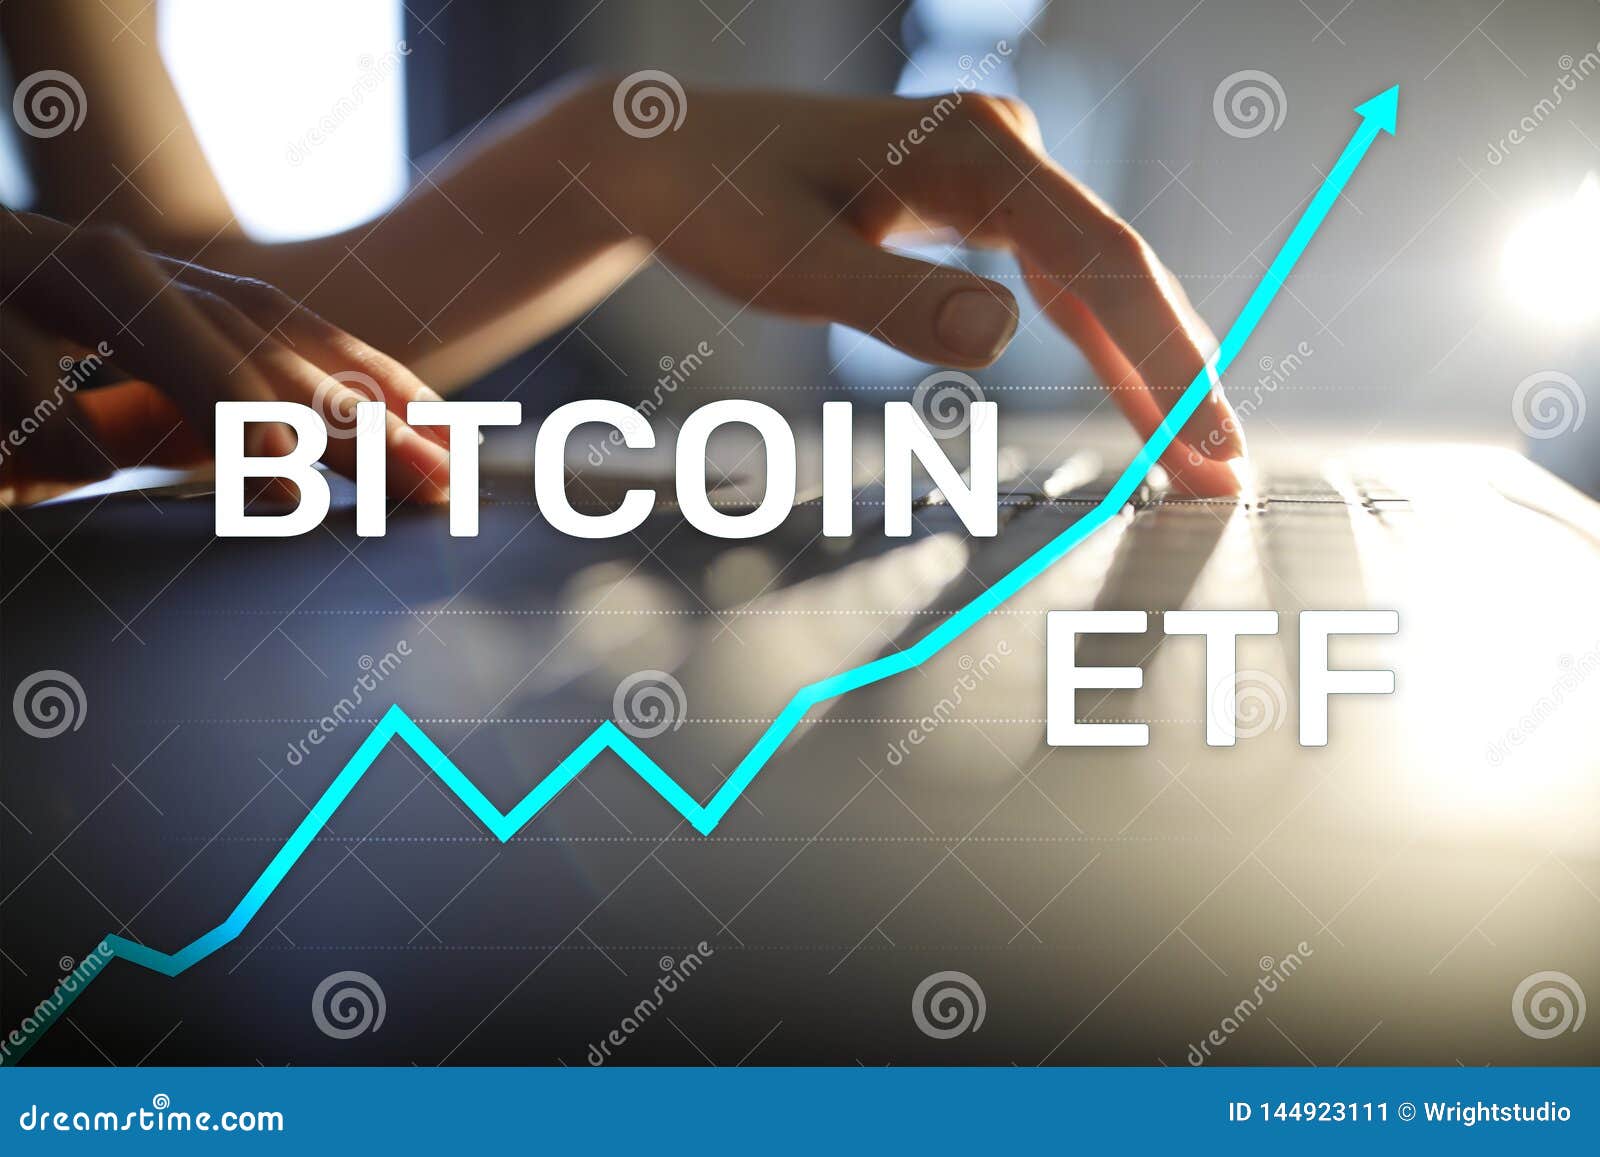 bitcoin etf, exchange traded fund and cryptocurrencies concept on virtual screen.